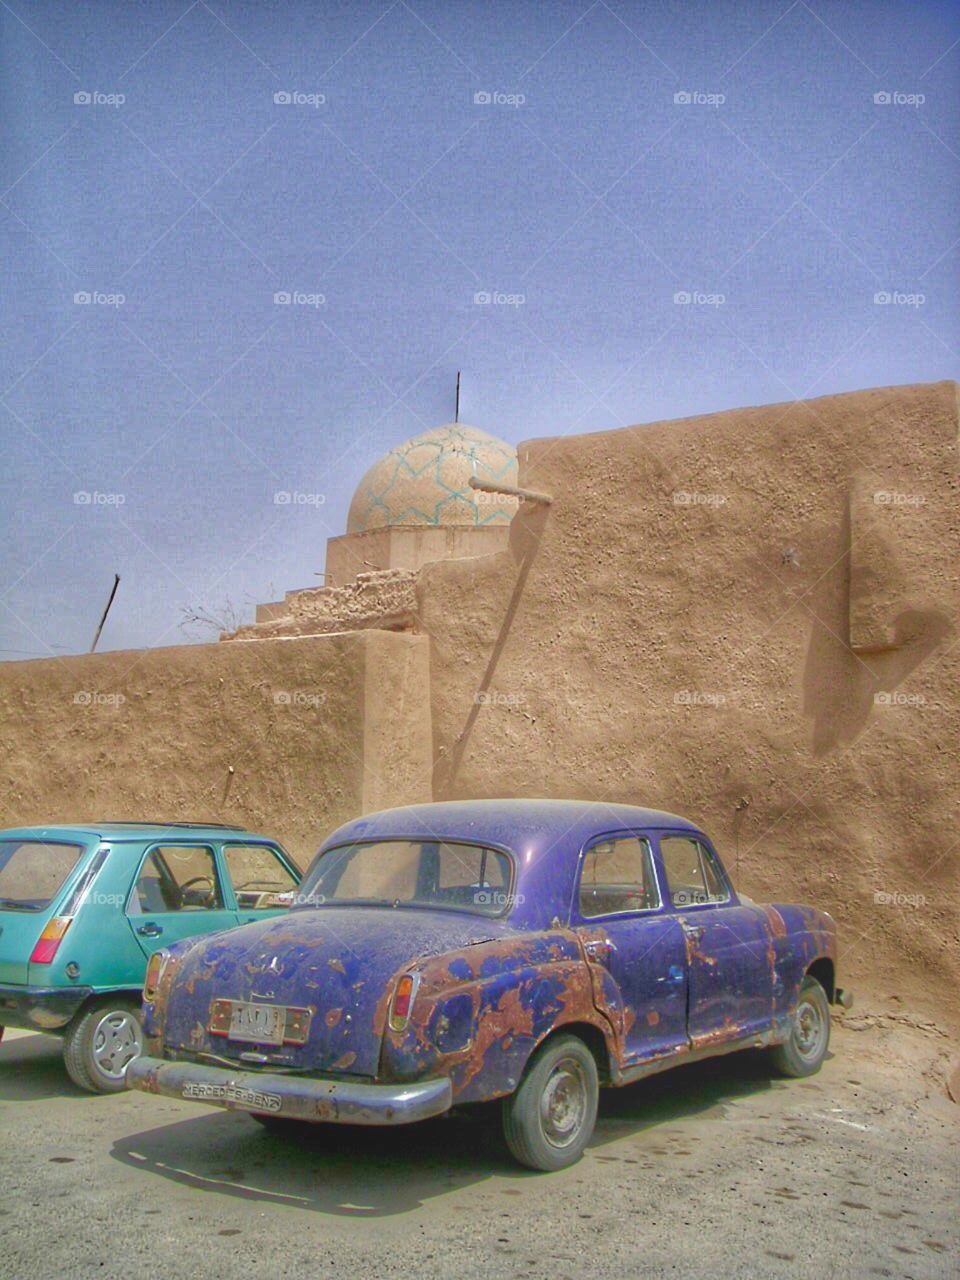 Old car in iran parked outside 